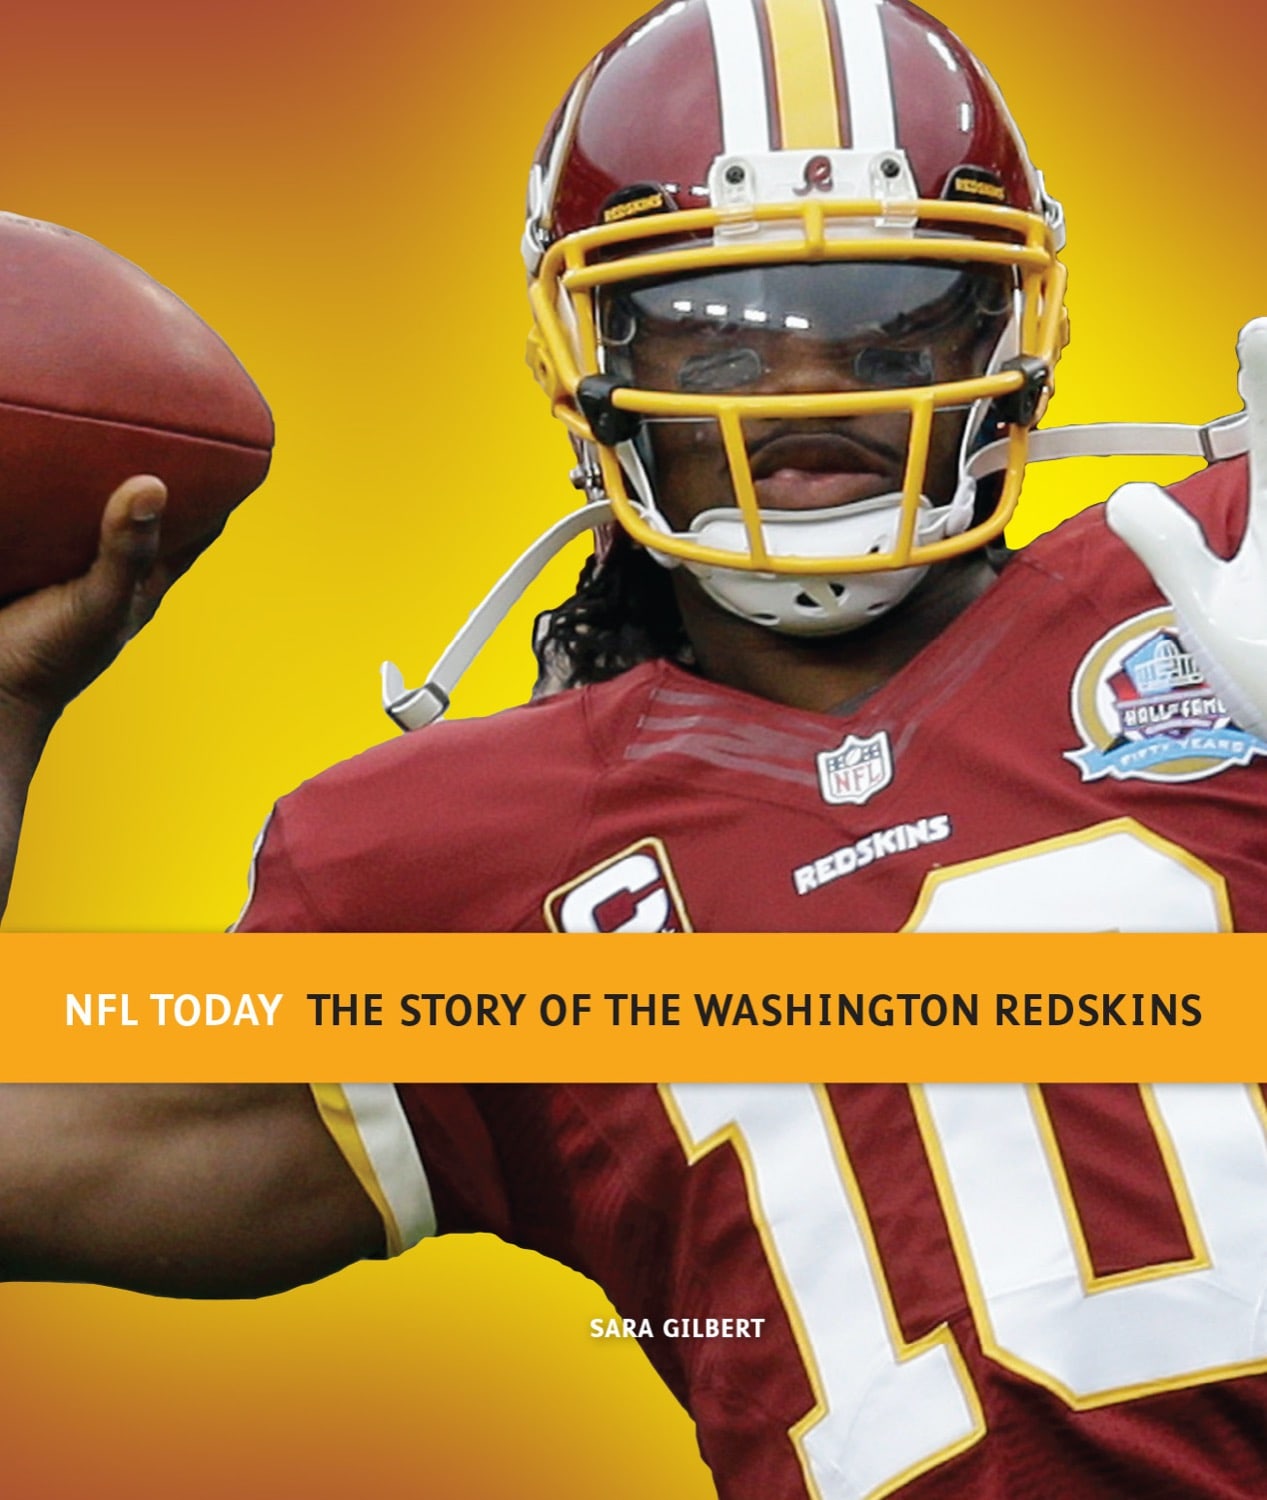 NFL Today: The Story of the Washington Redskins